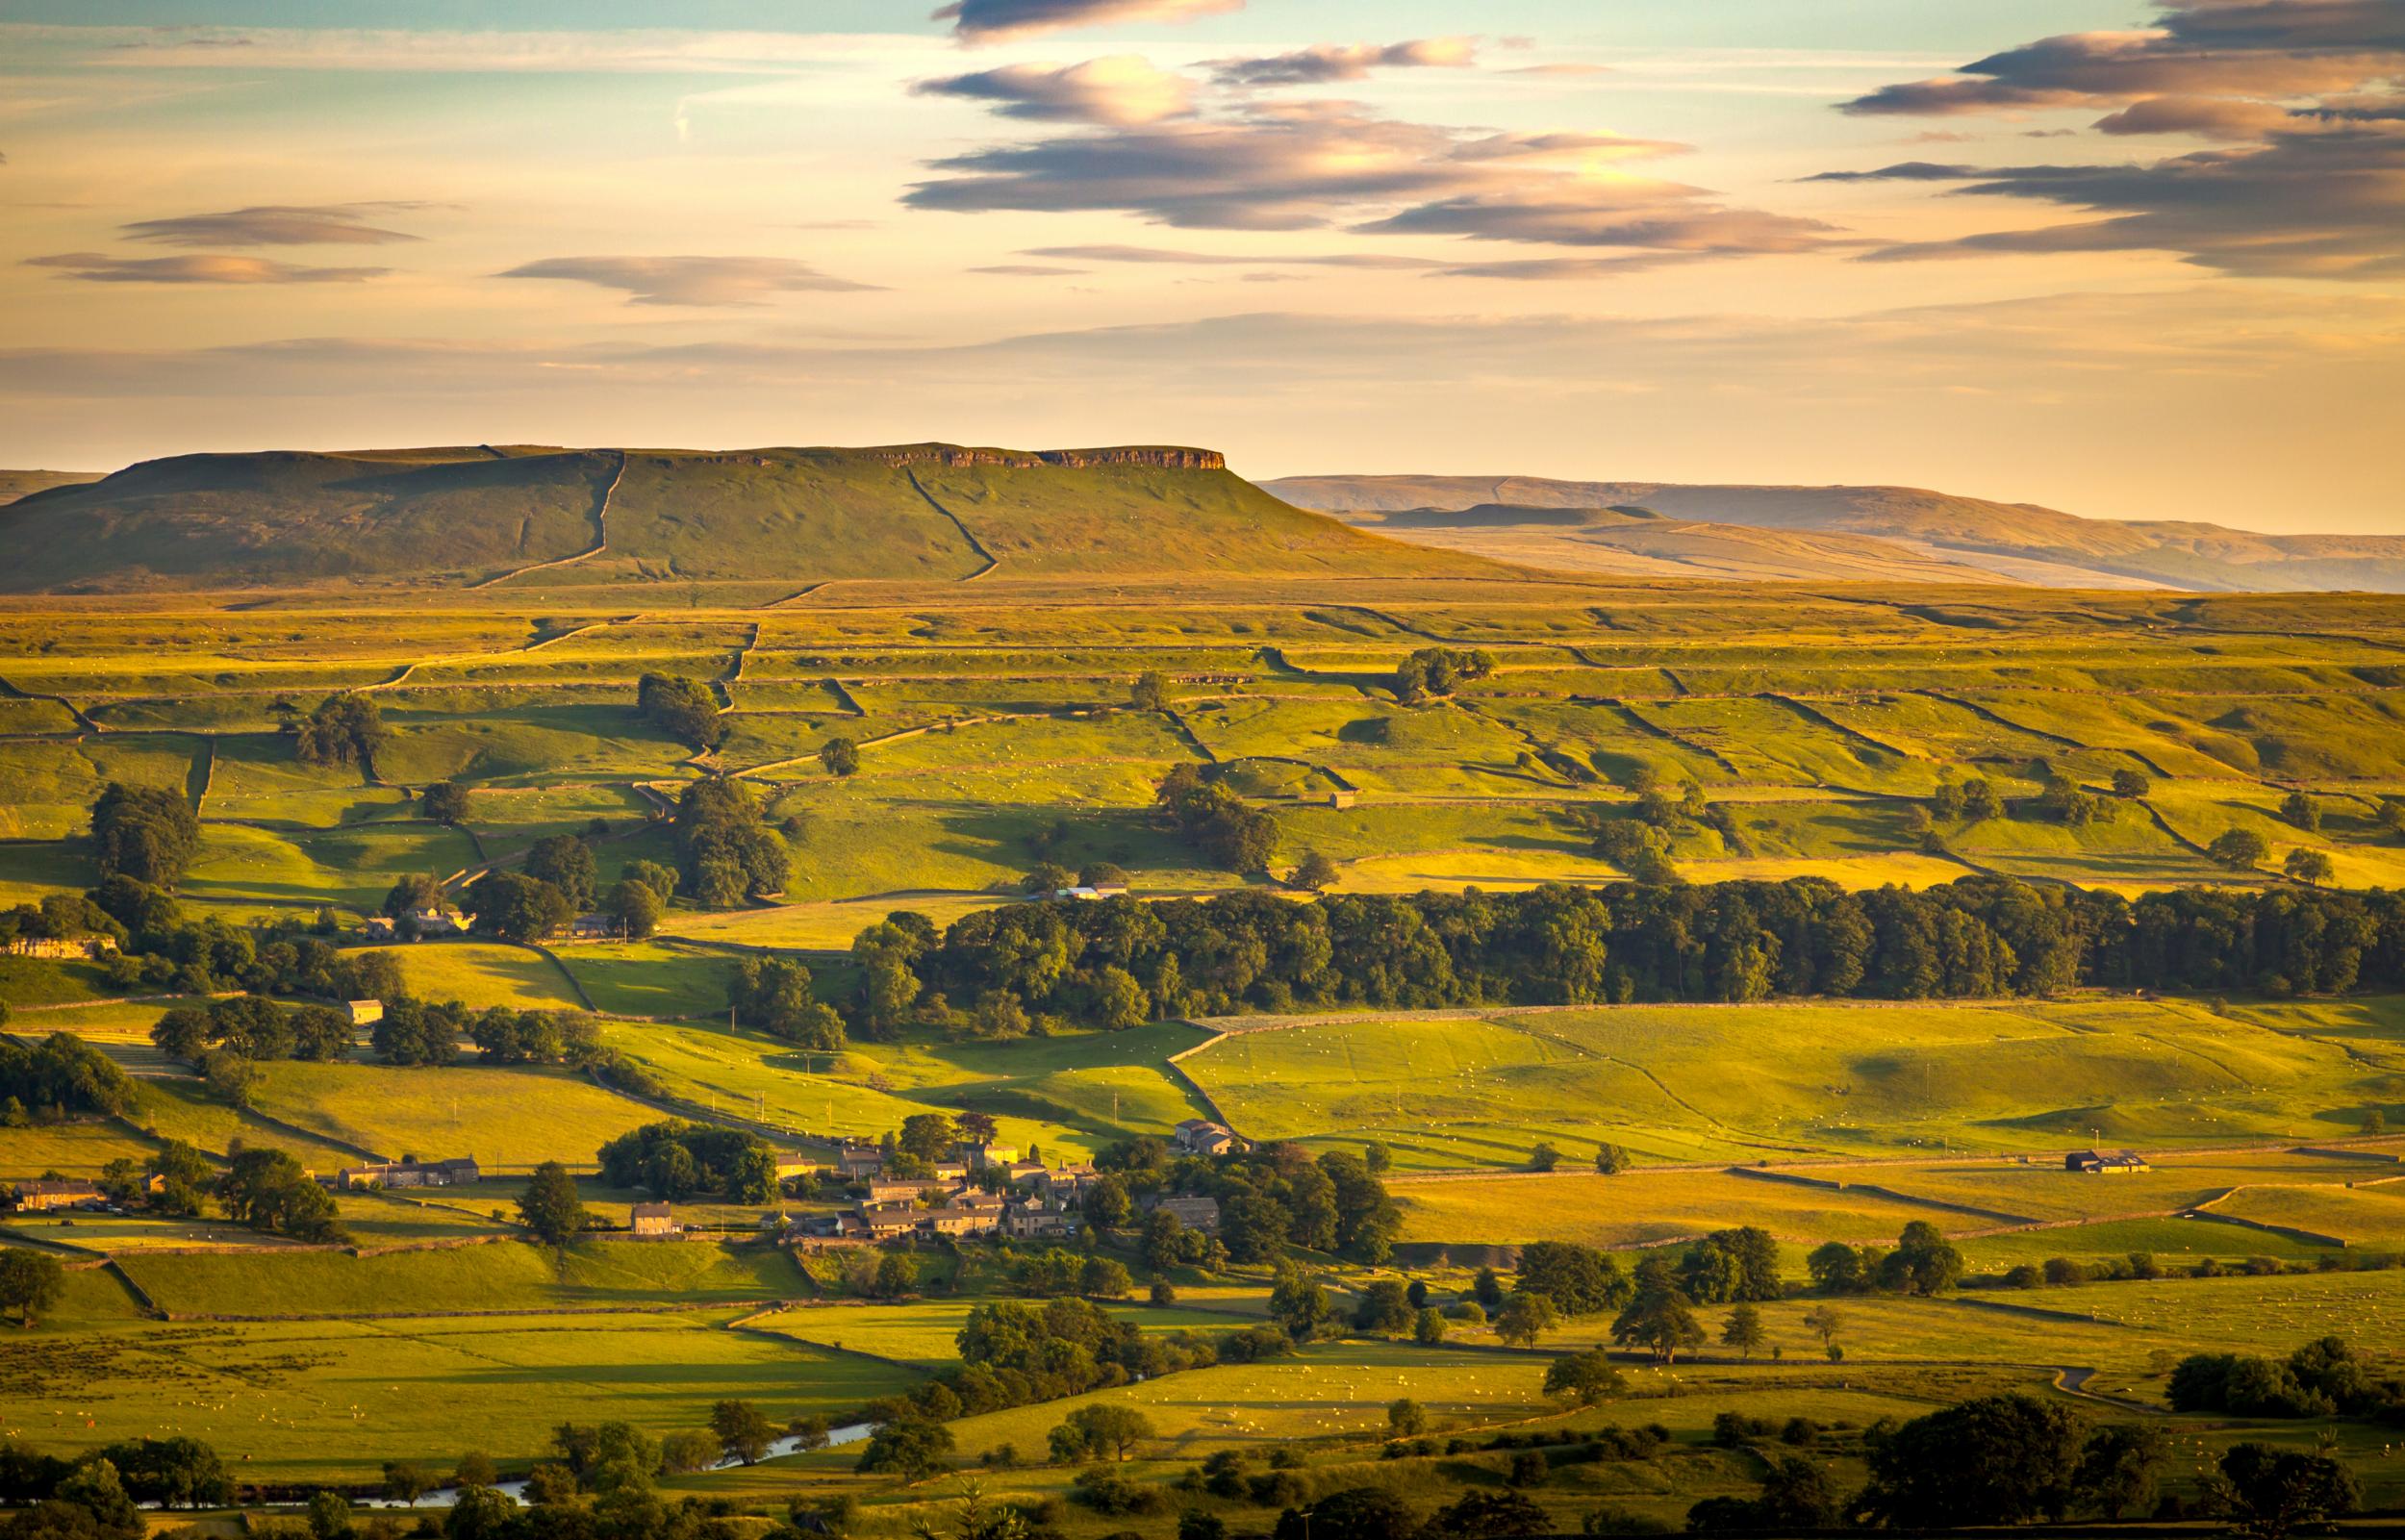 Sunset over Askrigg in Wensleydale, North Yorkshire. Did I mention we do cheese, too?